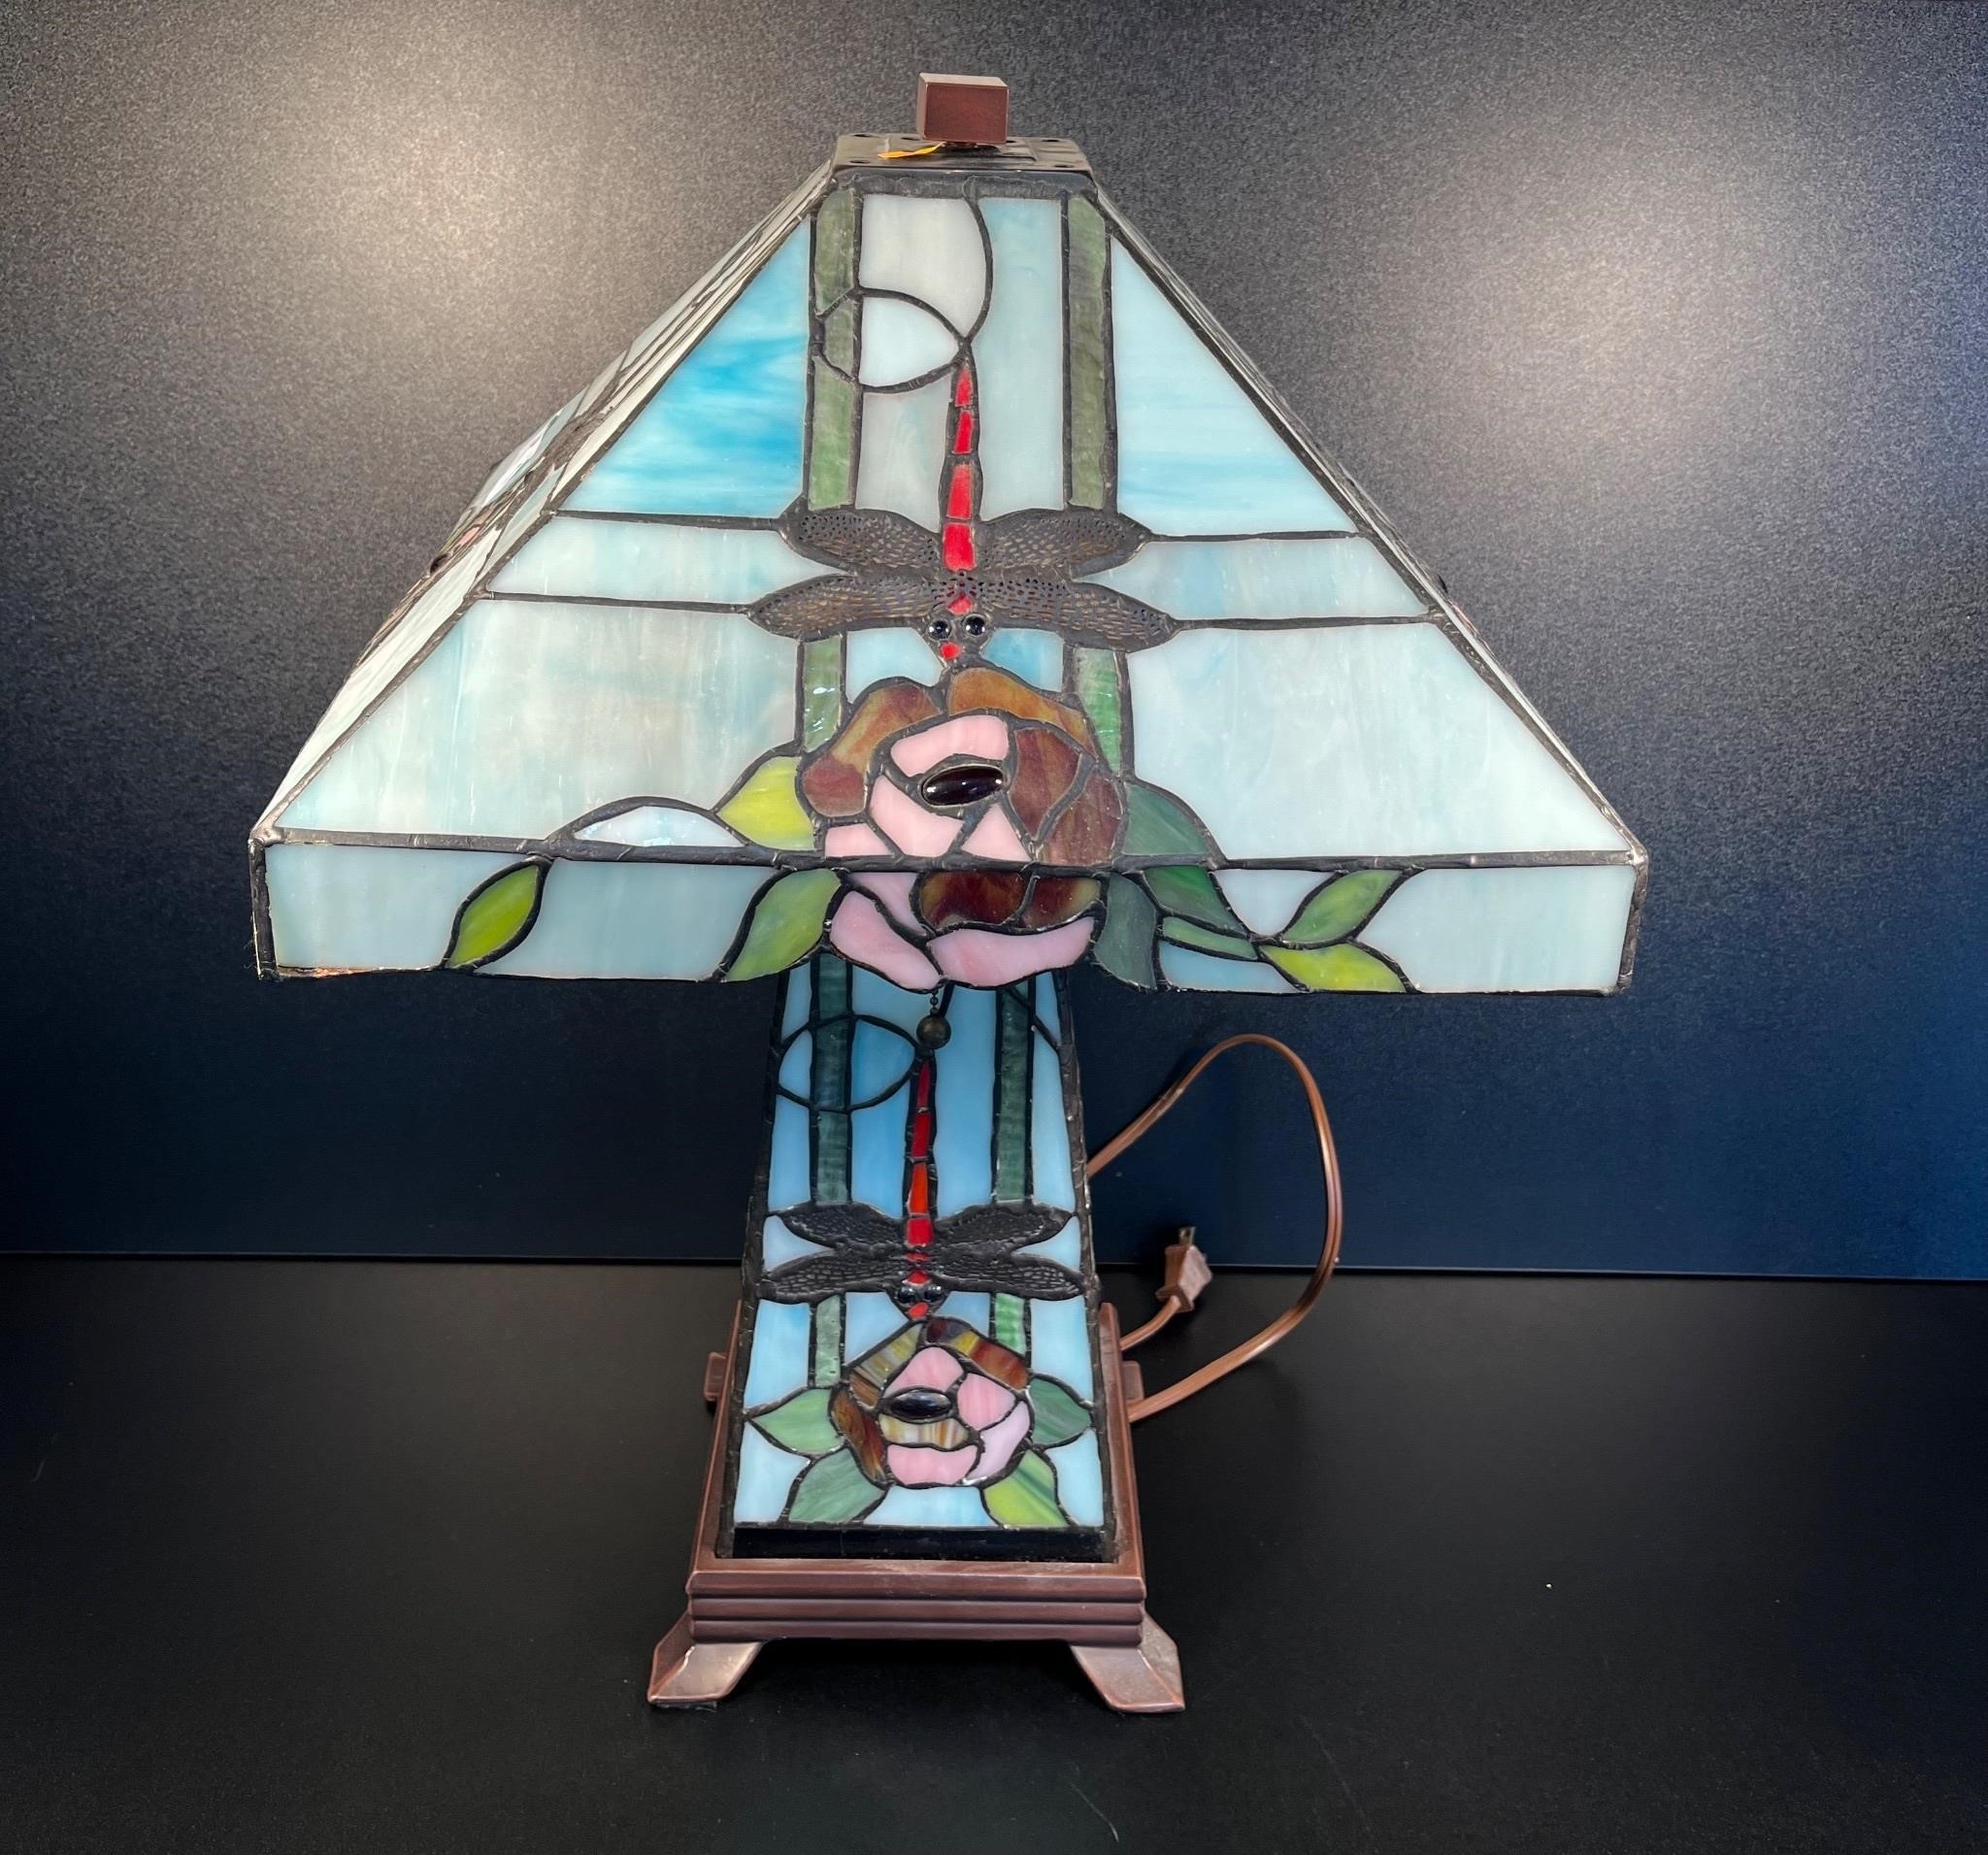 Stained Glass Dragonfly Table Lamp